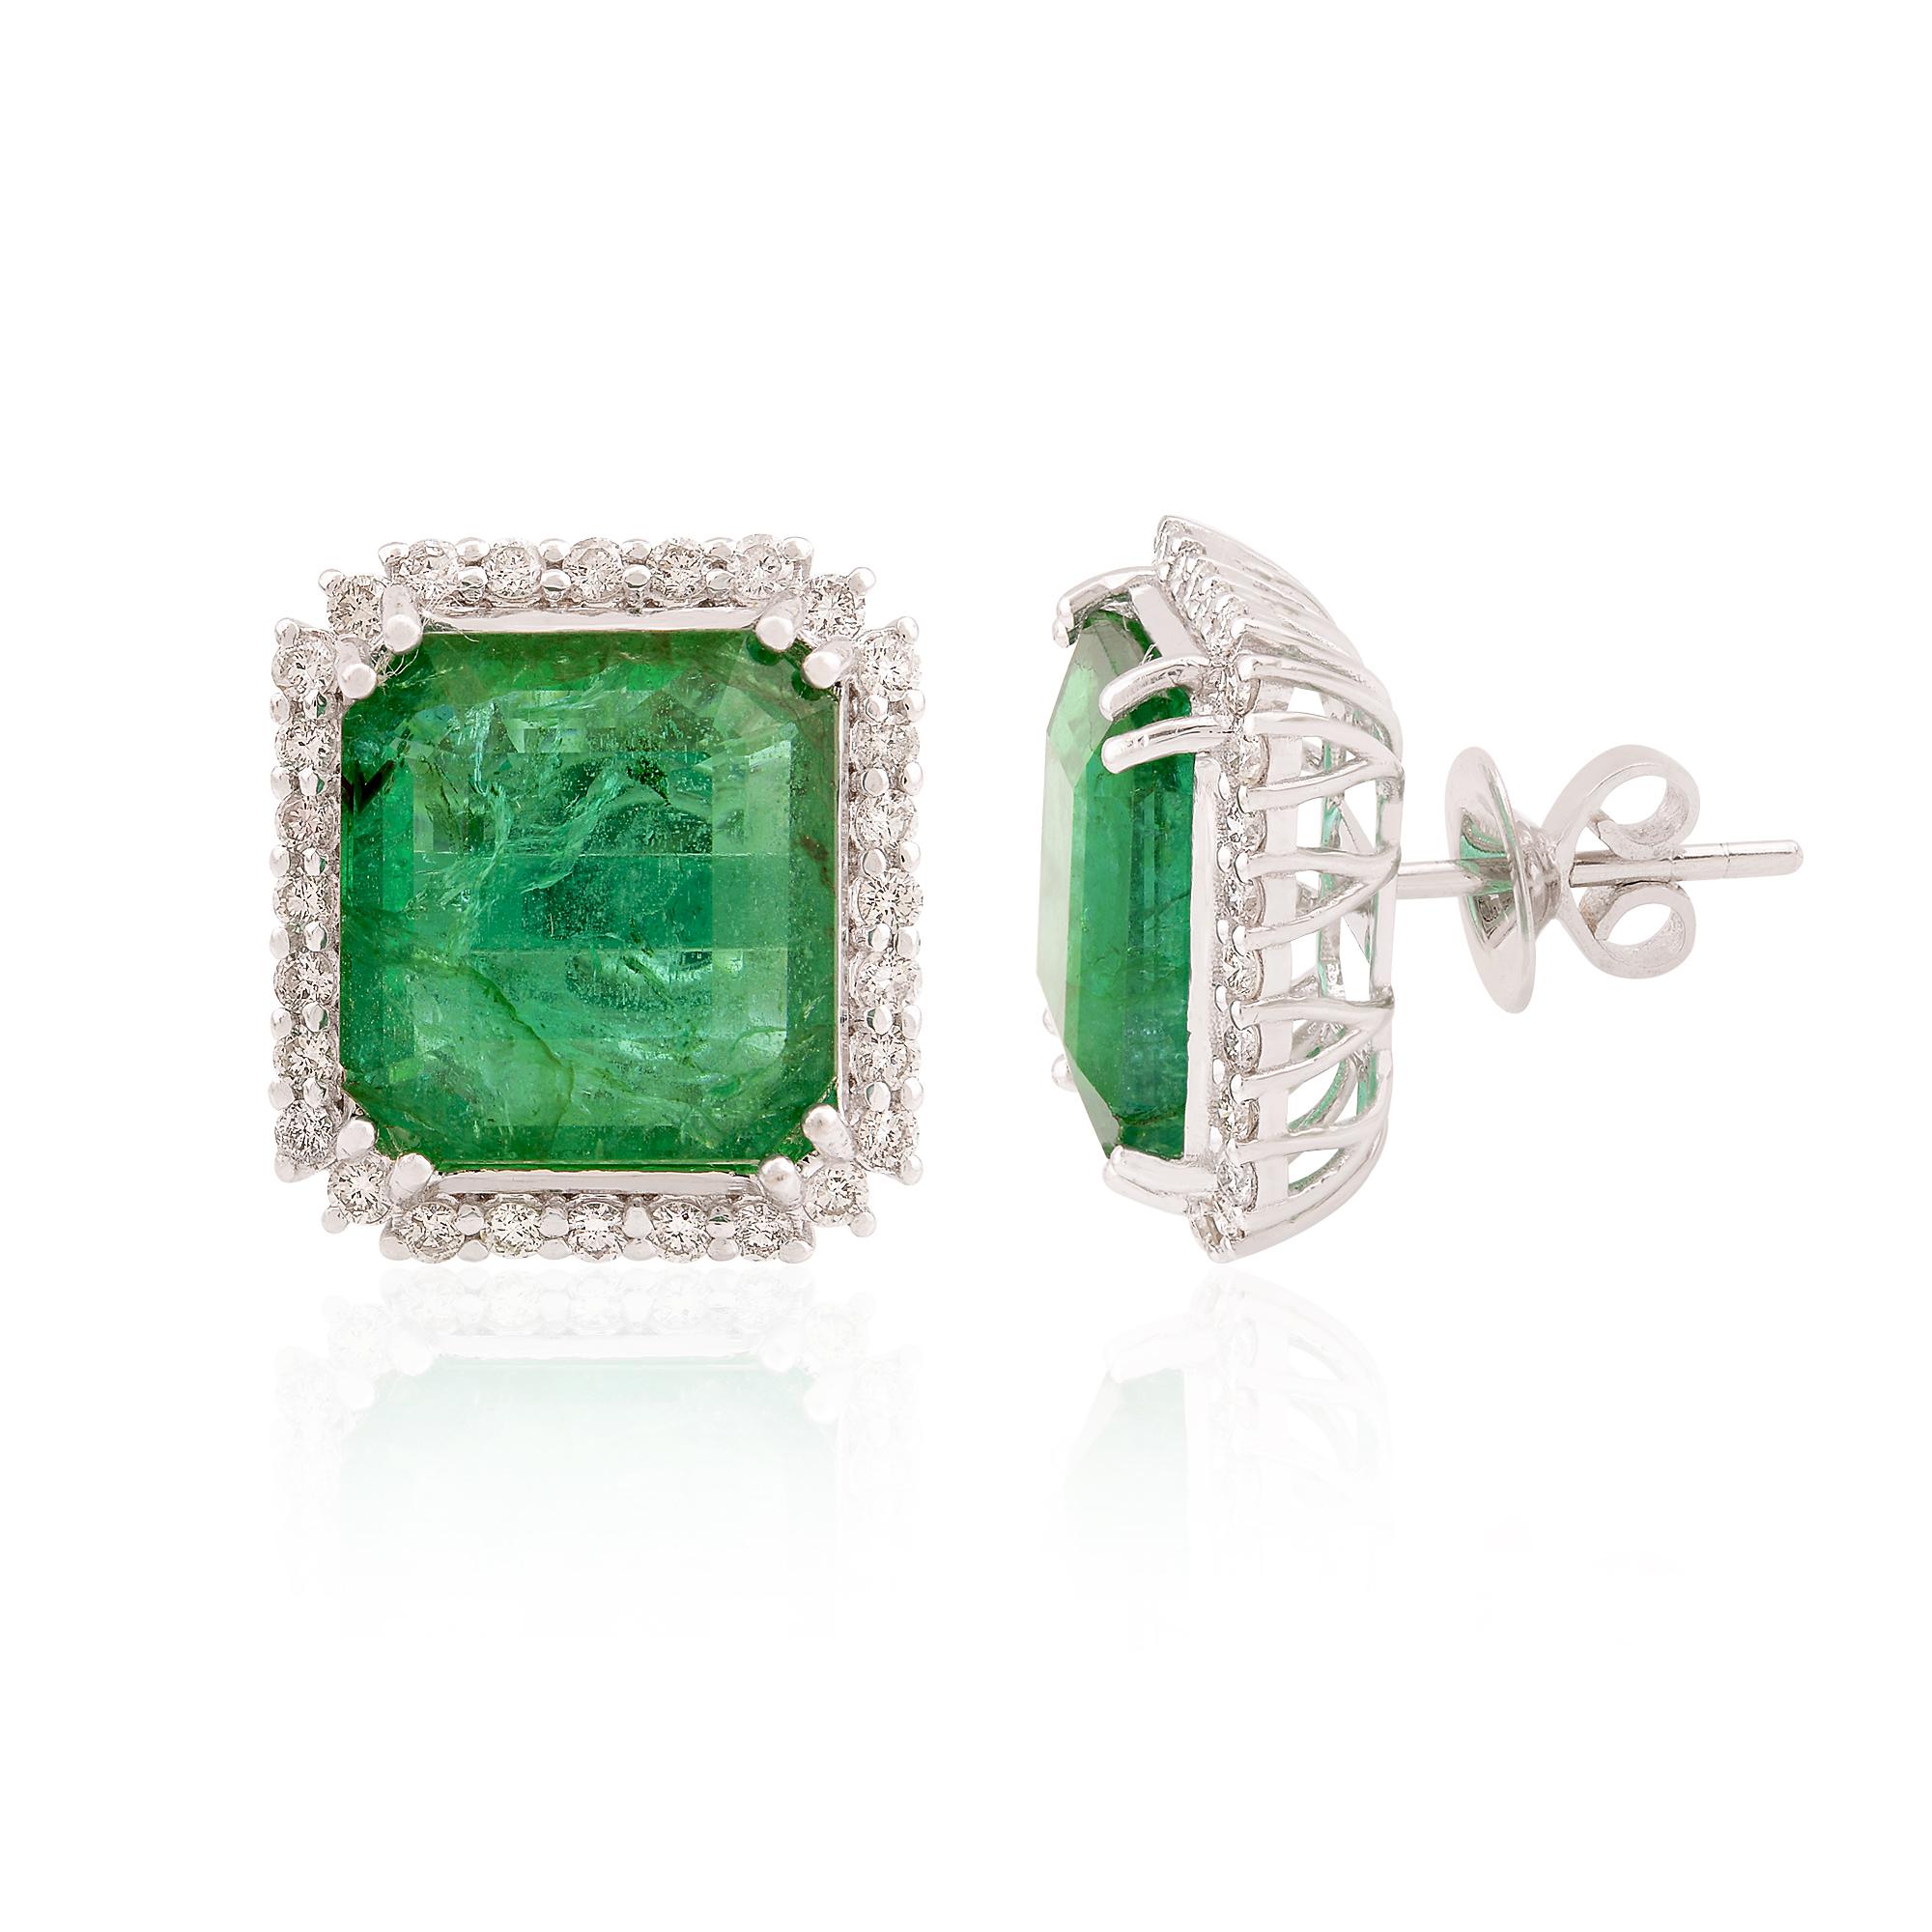 Each earring boasts a captivating Zambian Emerald, sourced from the rich mines of Zambia, renowned for producing some of the world's most sought-after emeralds. The lush green hue of these emeralds reflects the verdant landscapes from which they are